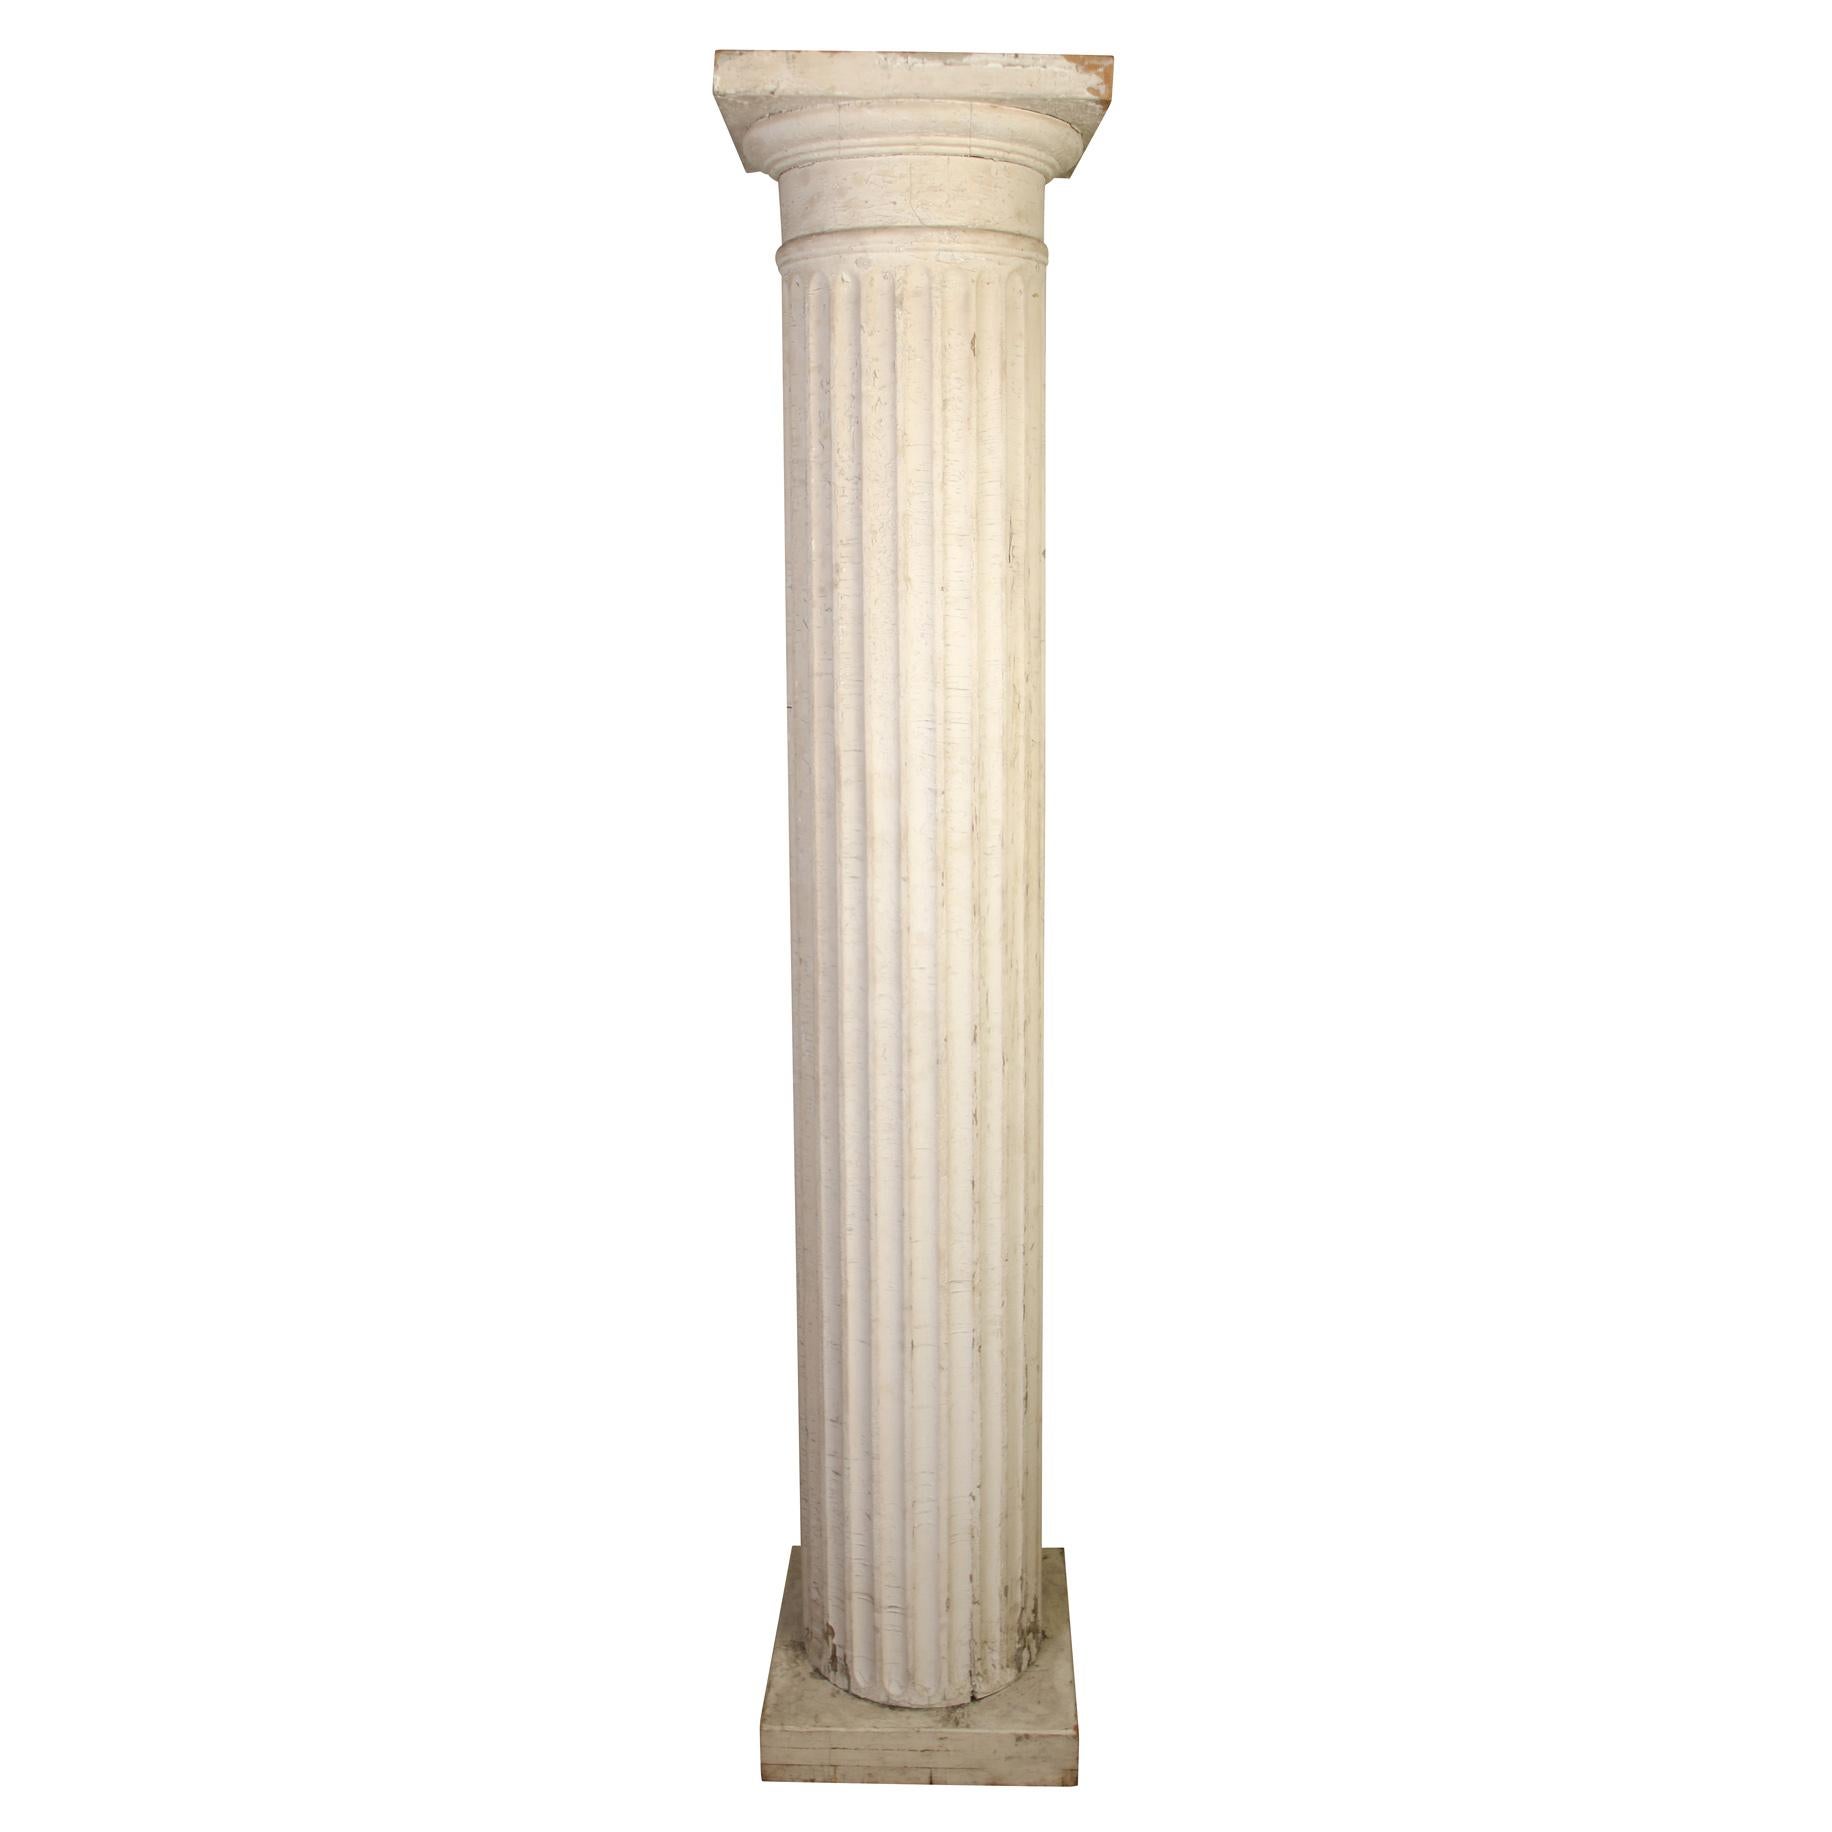 An impressive pair of antique painted and carved white fluted columns. Column diameter measures 14